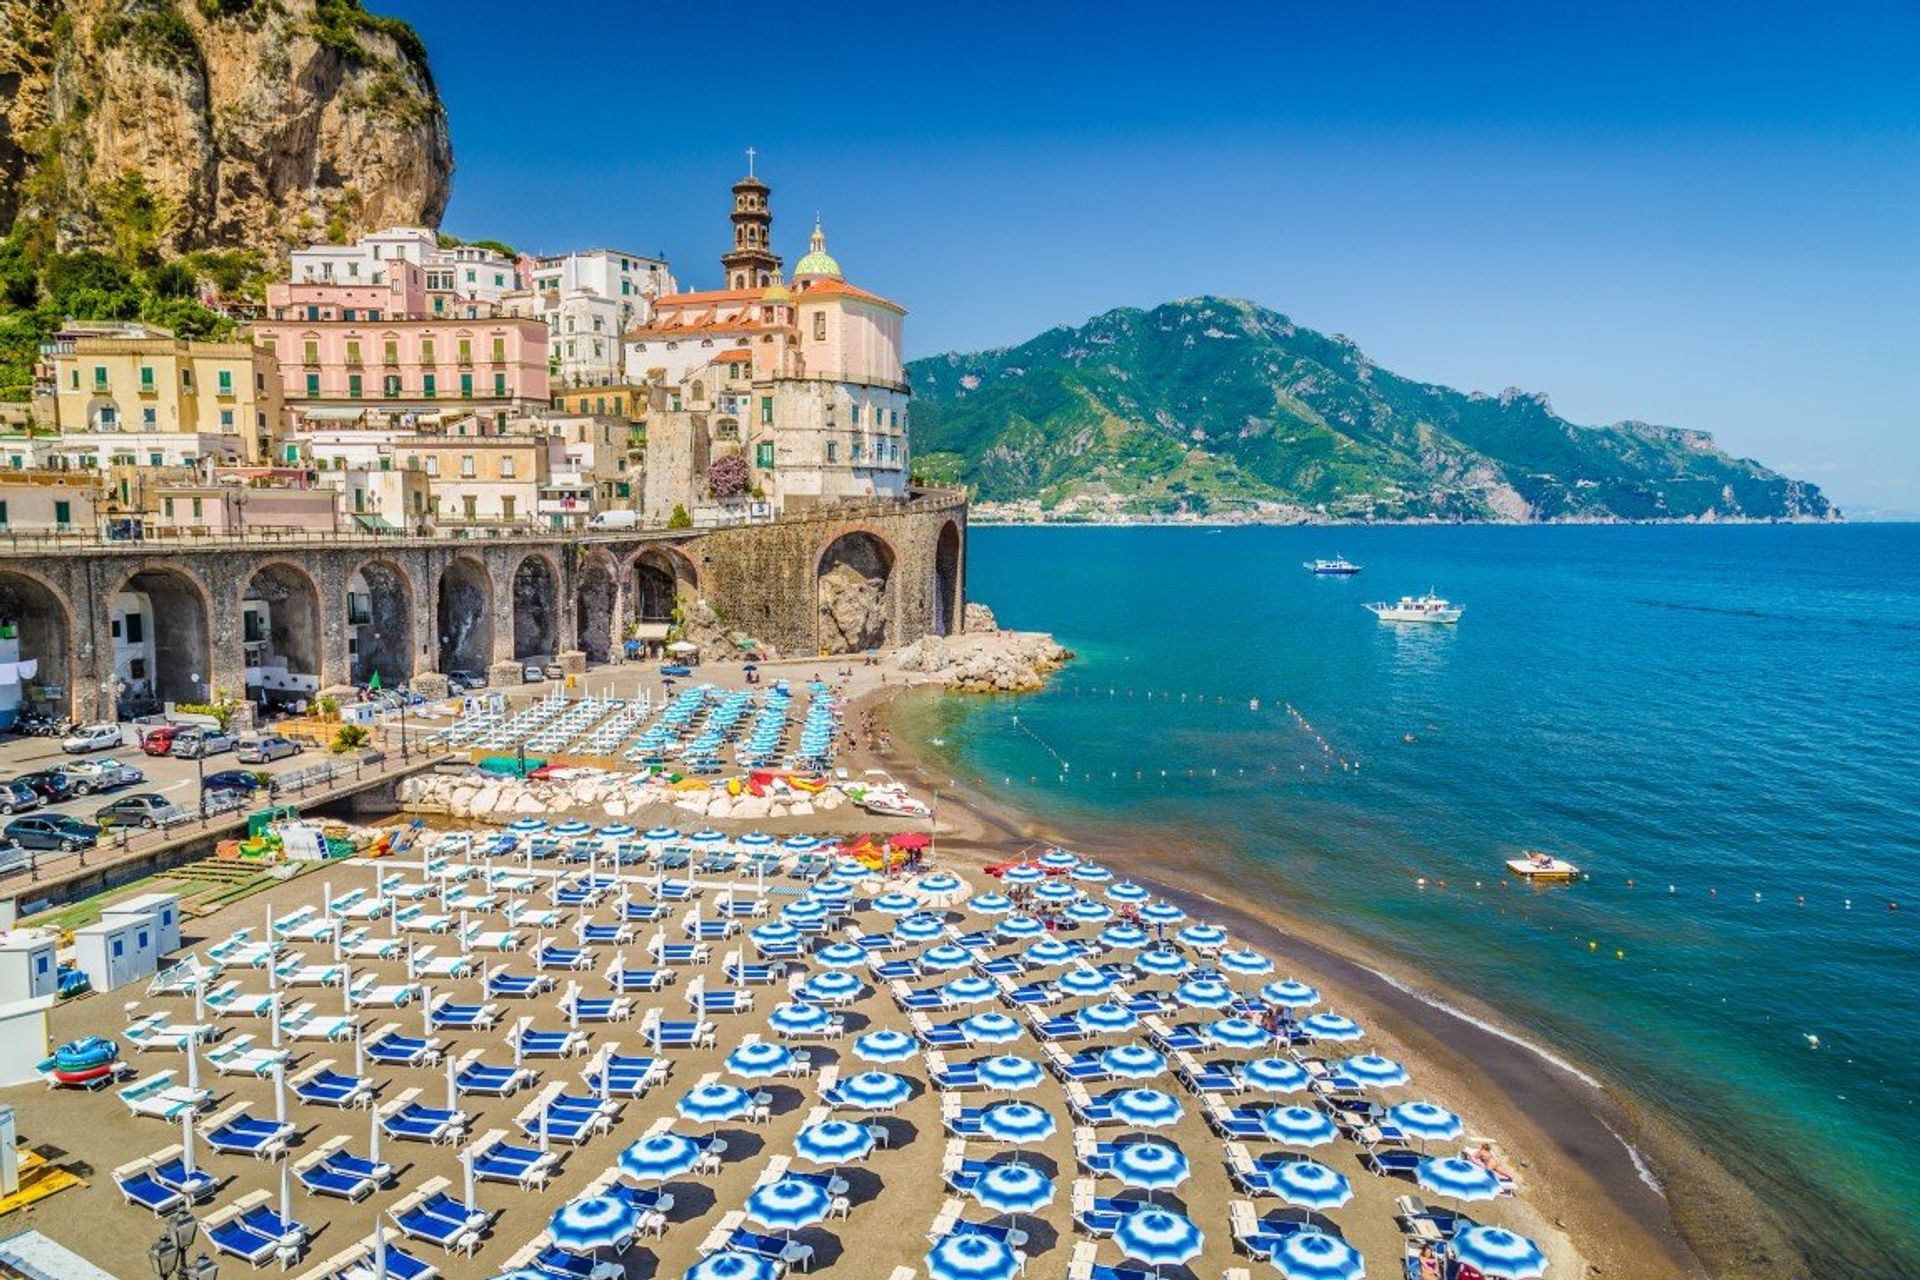 Enjoy a luxury stay on the Amalfi coast, boasting glorious beaches and charming pastel-coloured fishing villages